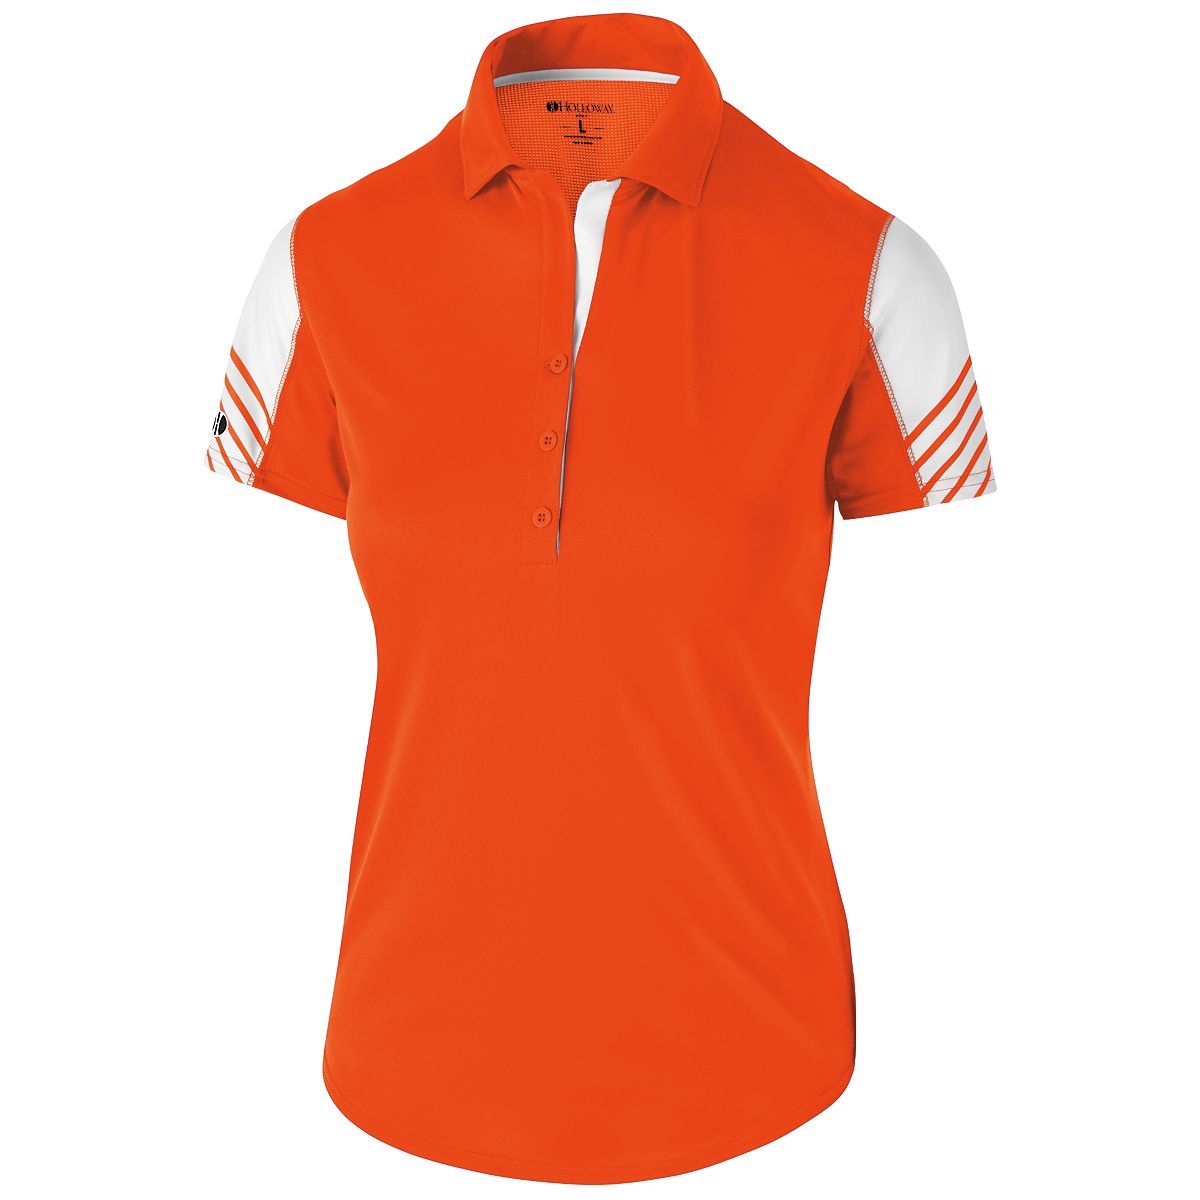 Holloway Ladies Arc Polo in Orange/White  -Part of the Ladies, Ladies-Polo, Polos, Holloway, Shirts product lines at KanaleyCreations.com